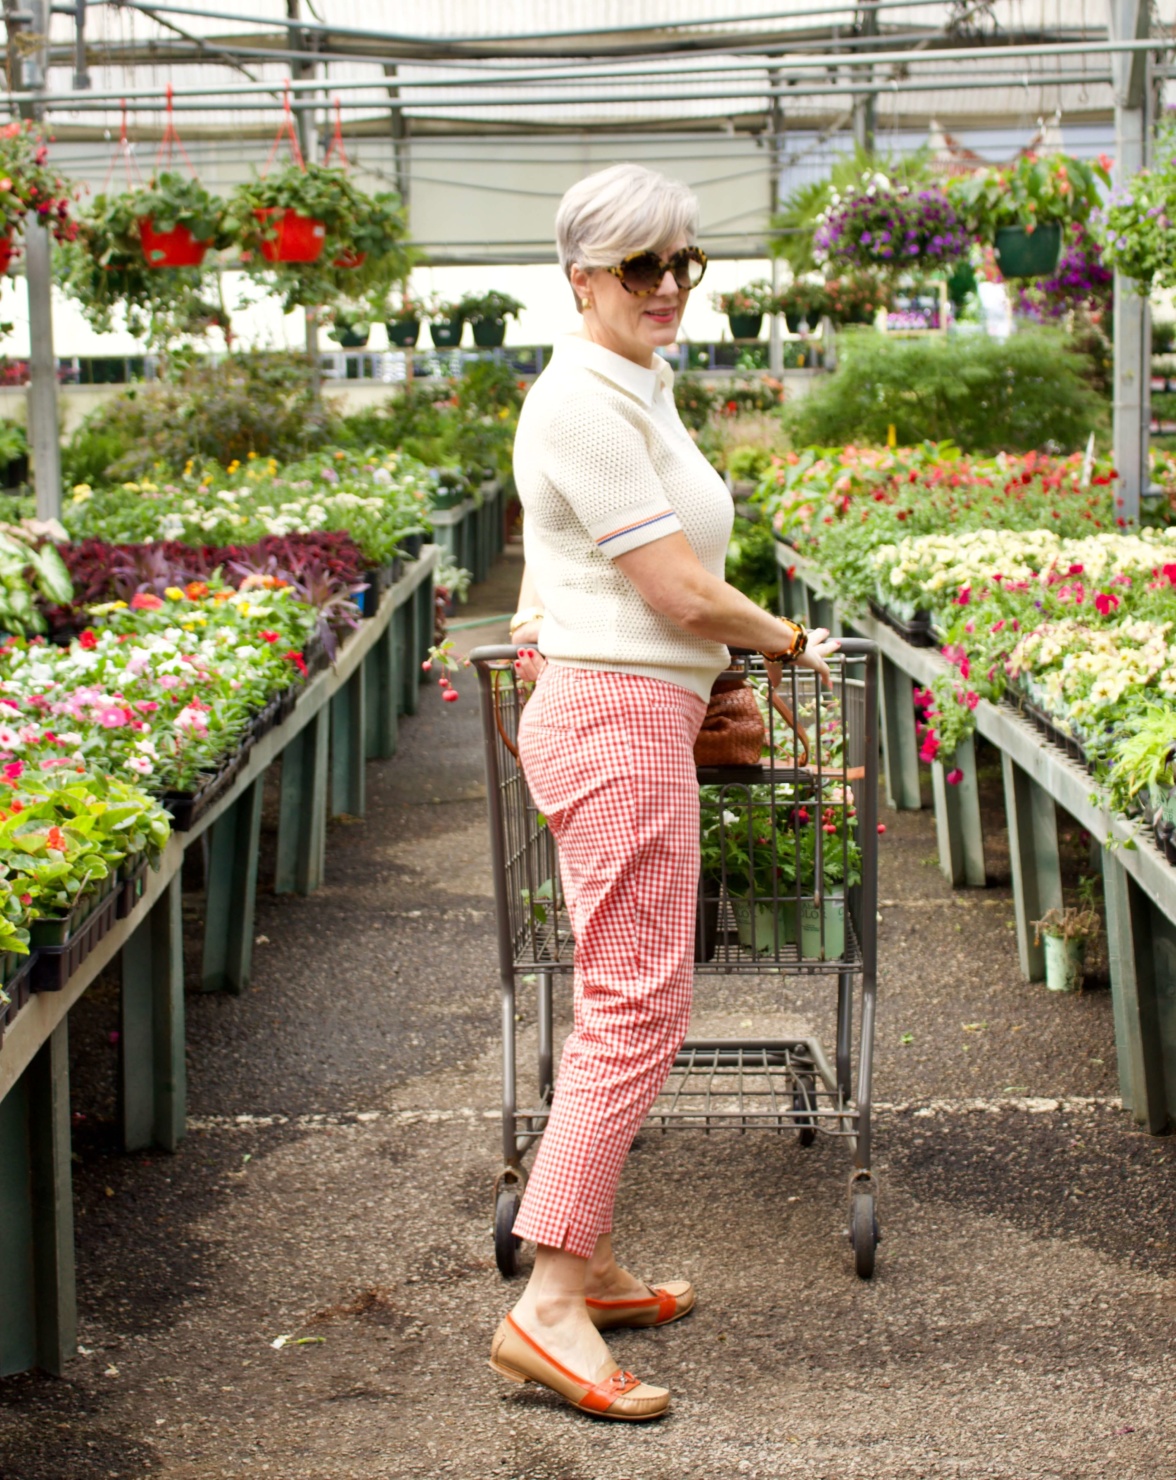 beth from Style at a Certain Age wears a Tory Burch short sleeve sweater, gingham pants, and Cole Haan loafers